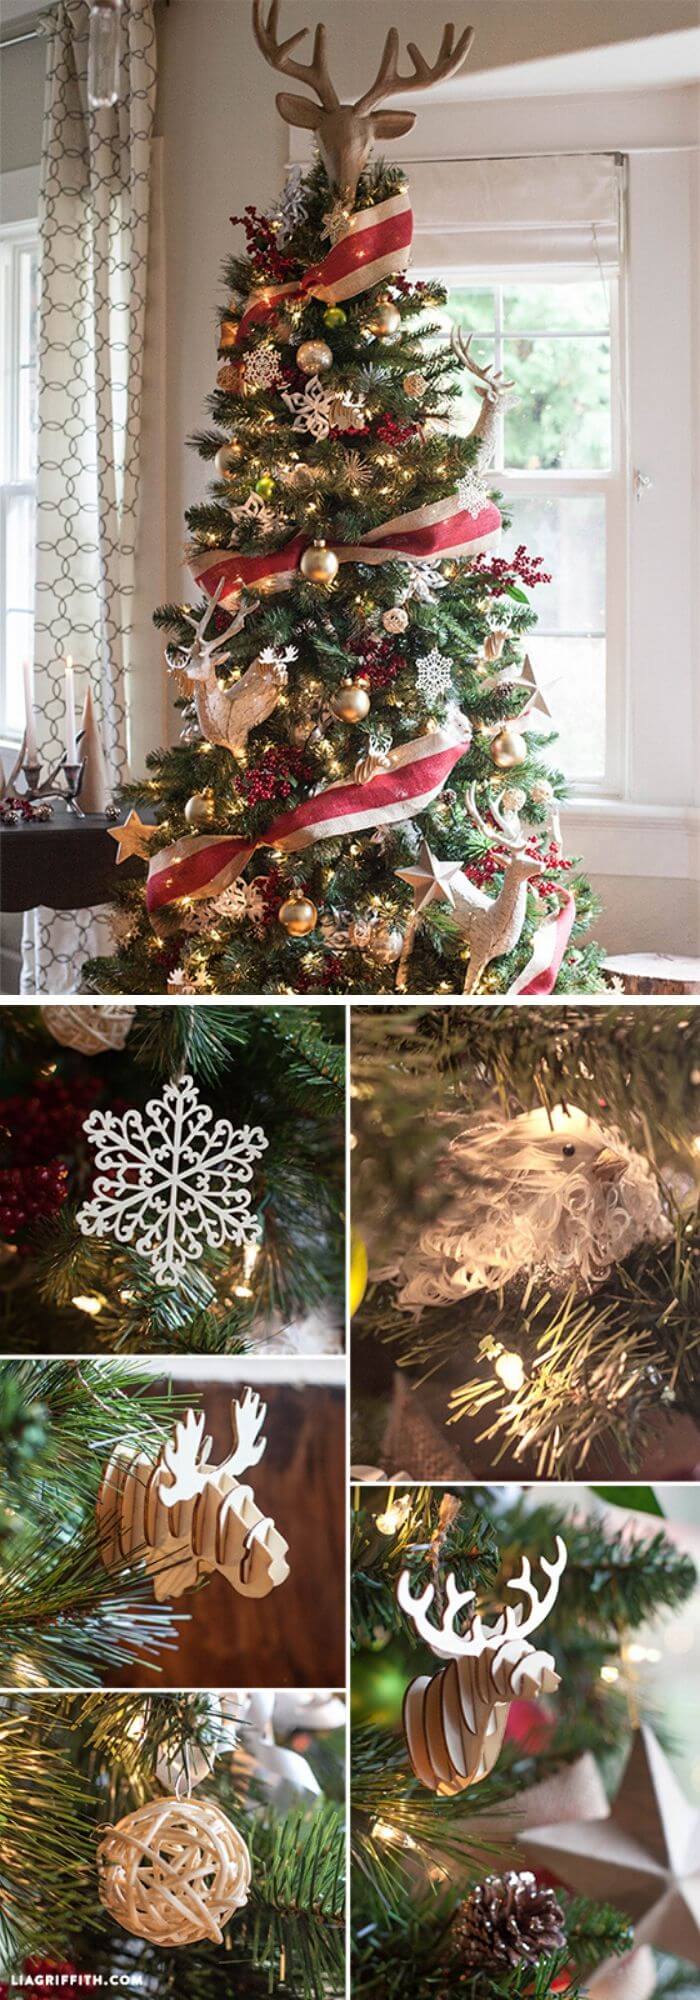 Best Way to Decorate Christmas Trees on a Budget: Inexpensive or Free & Easy Holiday Ornaments & Decorations